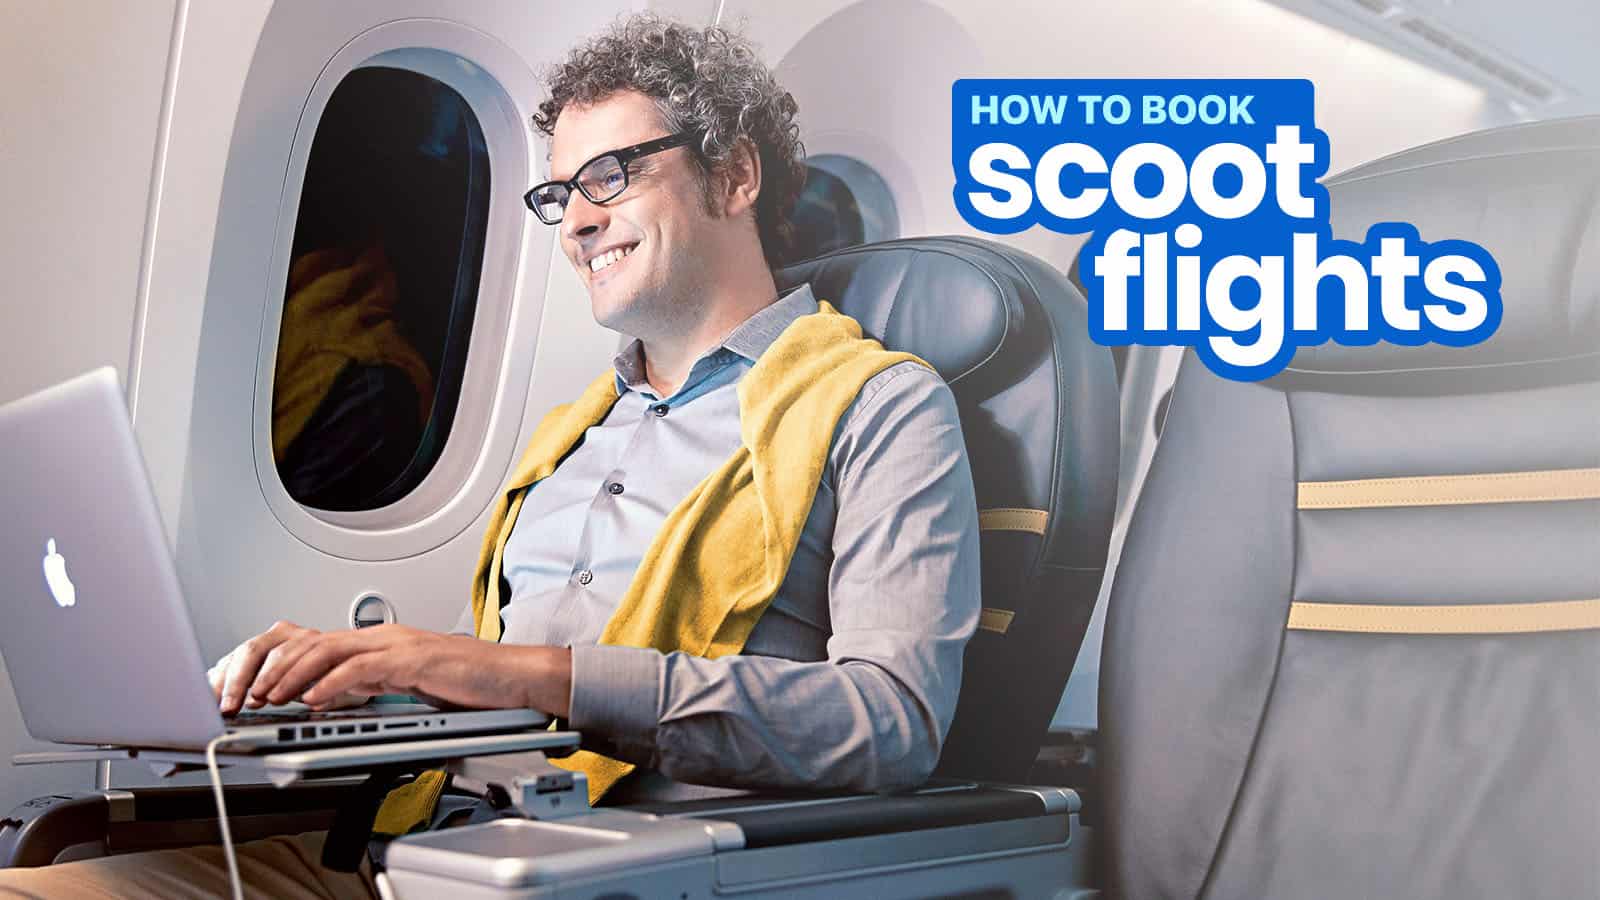 SCOOT PROMO FLIGHTS: How to Book without a Credit Card